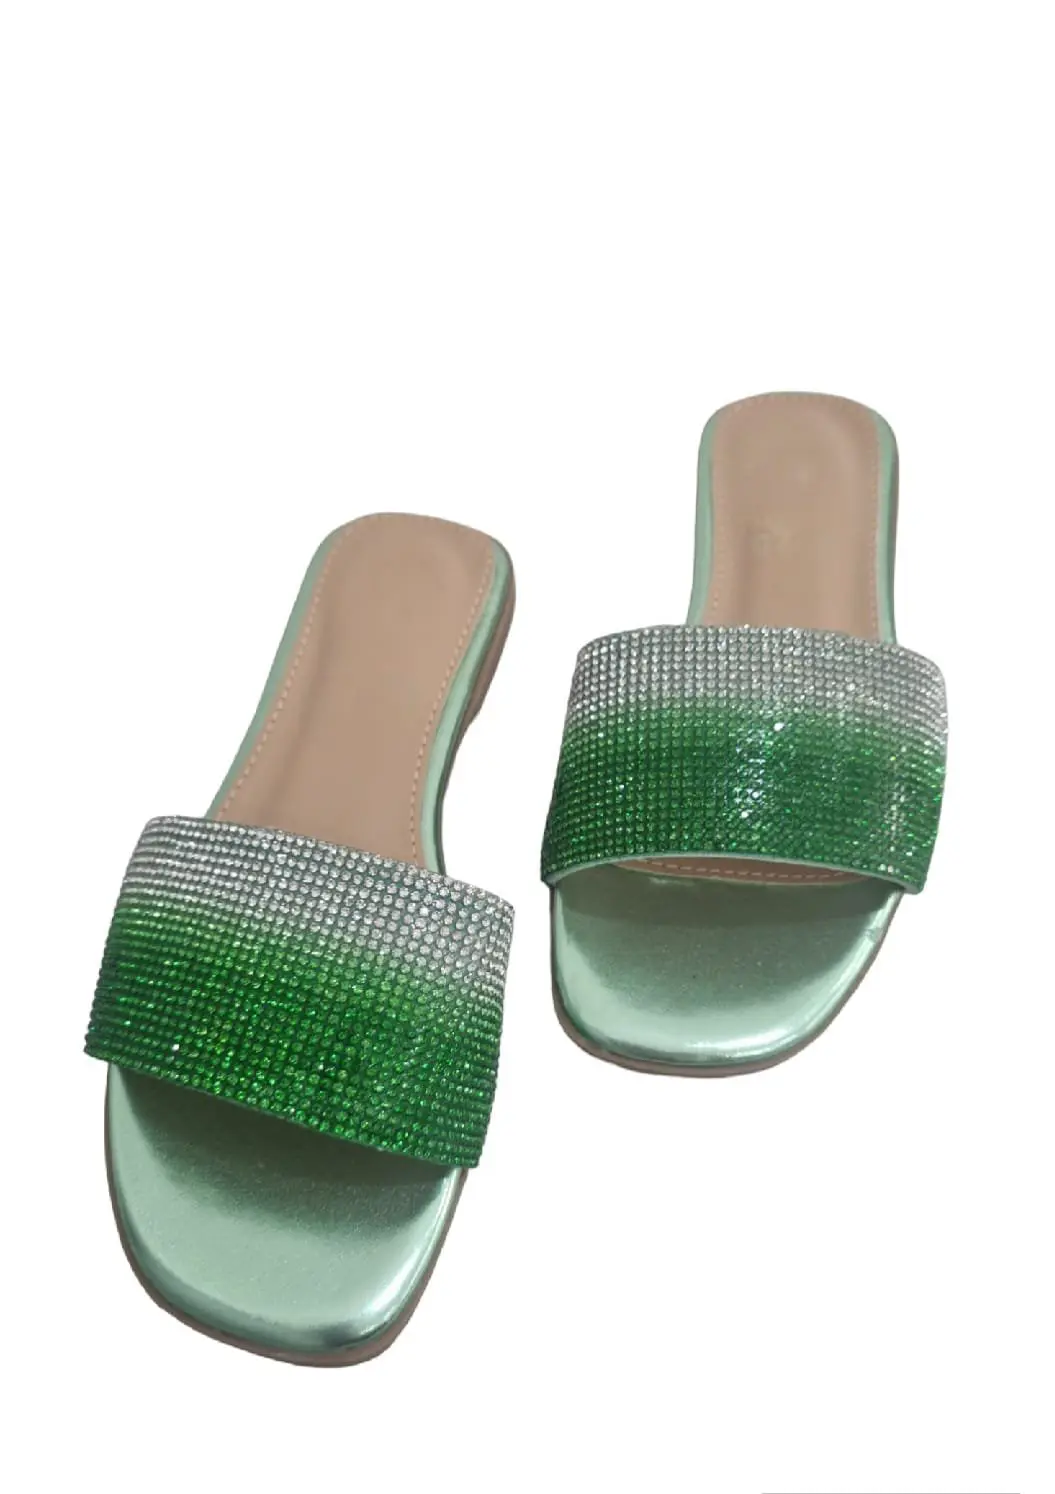 Green slippers with light points, 1.5cm rise, comfort cushion.